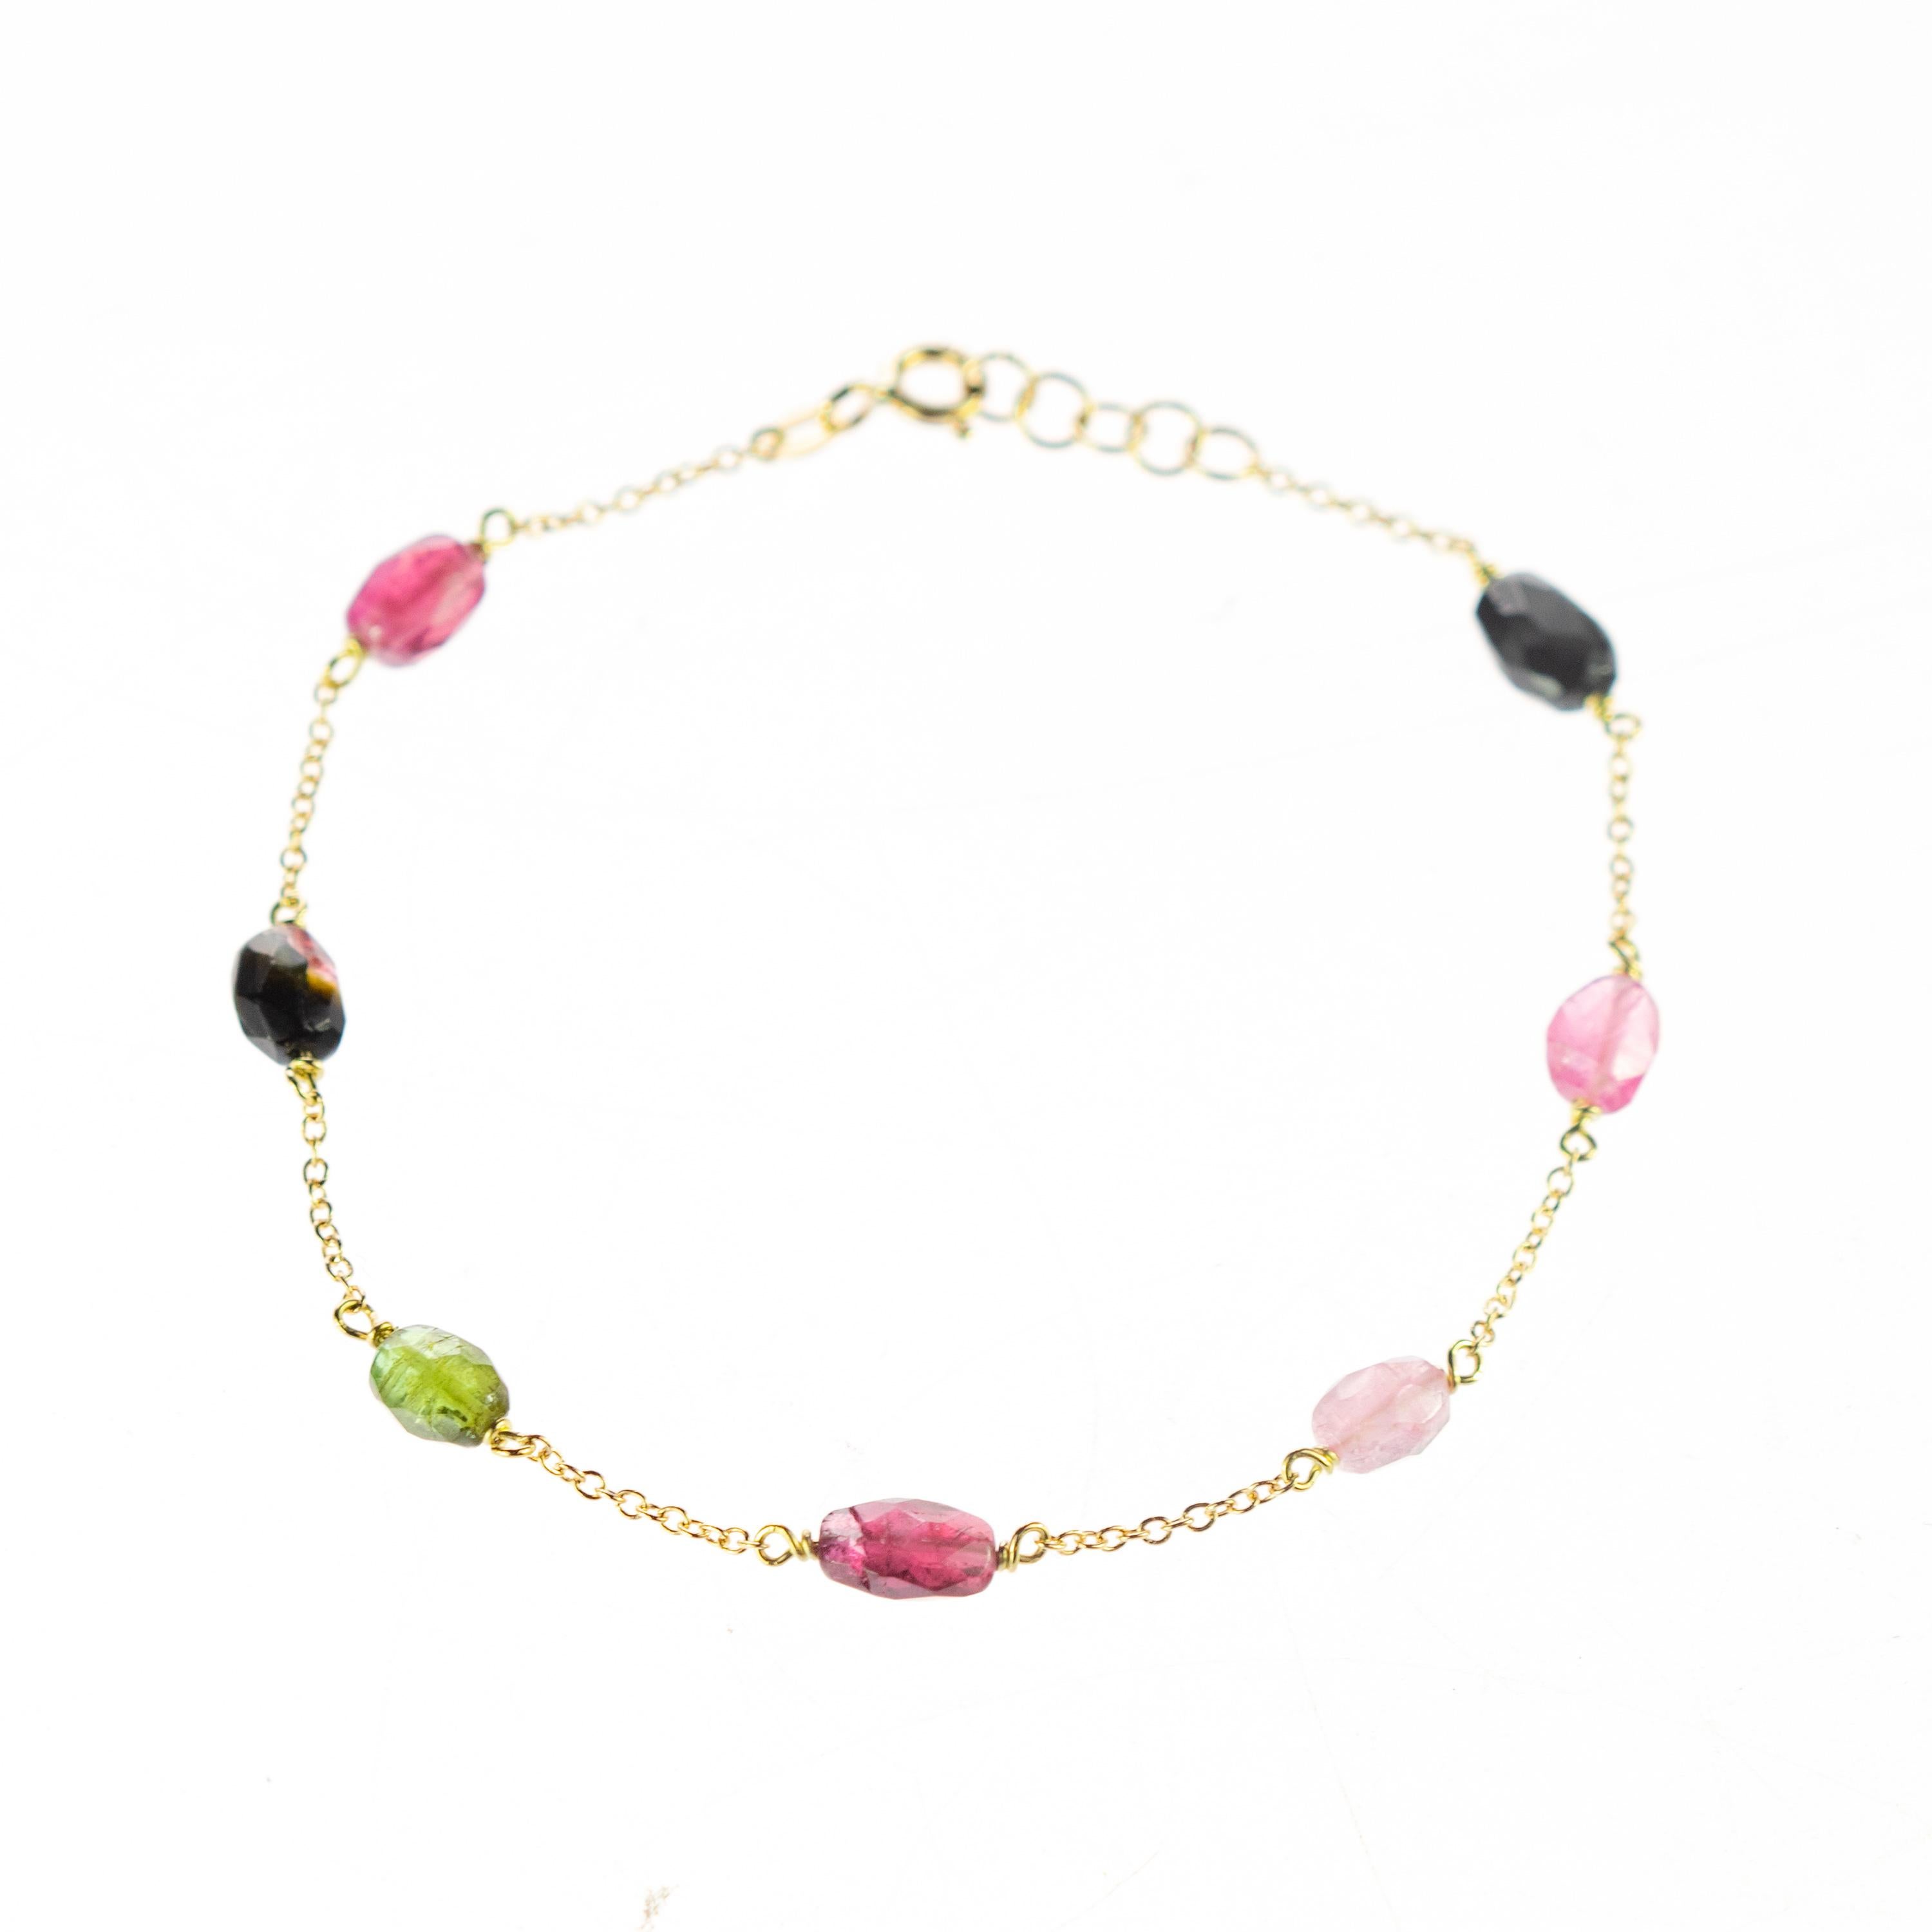 Intini Jewels signature quality on a modern and contemporary design jewel. Seven oval gems of top quality of tourmaline embellish a delicate 18 karat yellow gold chain bracelet. A jewel full of color and pasion. 

Ancient beliefs say that we should